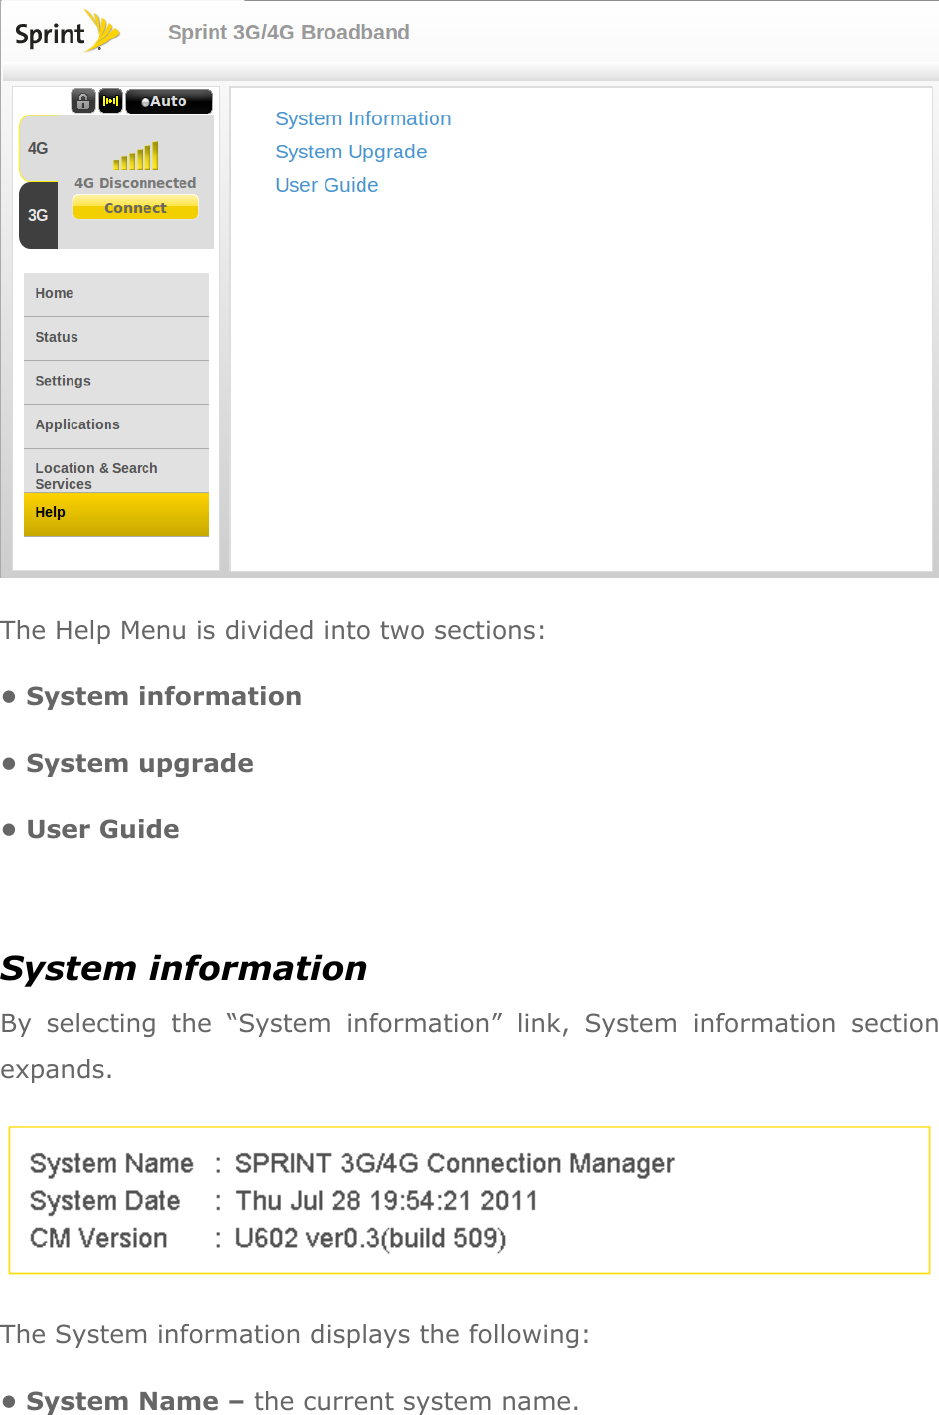  The Help Menu is divided into two sections: • System information • System upgrade • User Guide  System information By  selecting  the  “System  information”  link,  System  information  section expands.  The System information displays the following: • System Name – the current system name. 